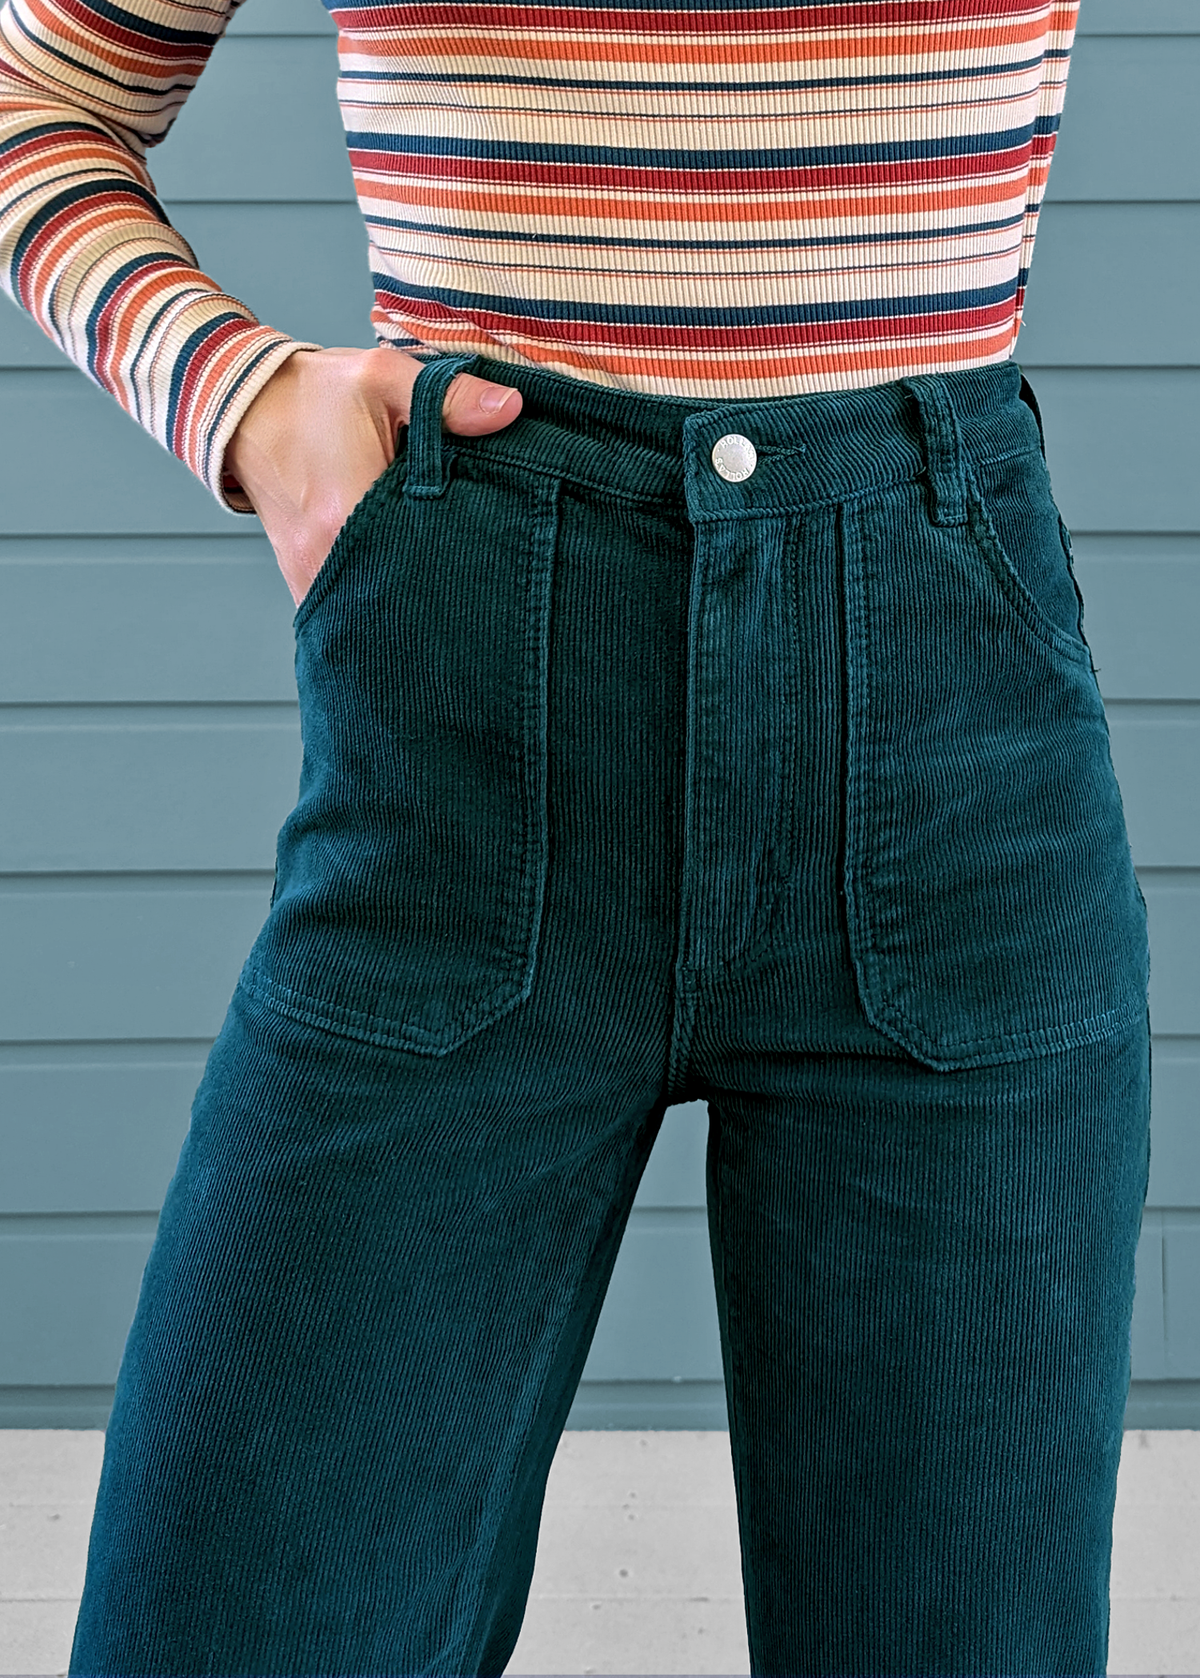 70s inspired Forest Green Teal Blue Corduroy Eastcoast Flares with high rise waist by Rolla's Jeans